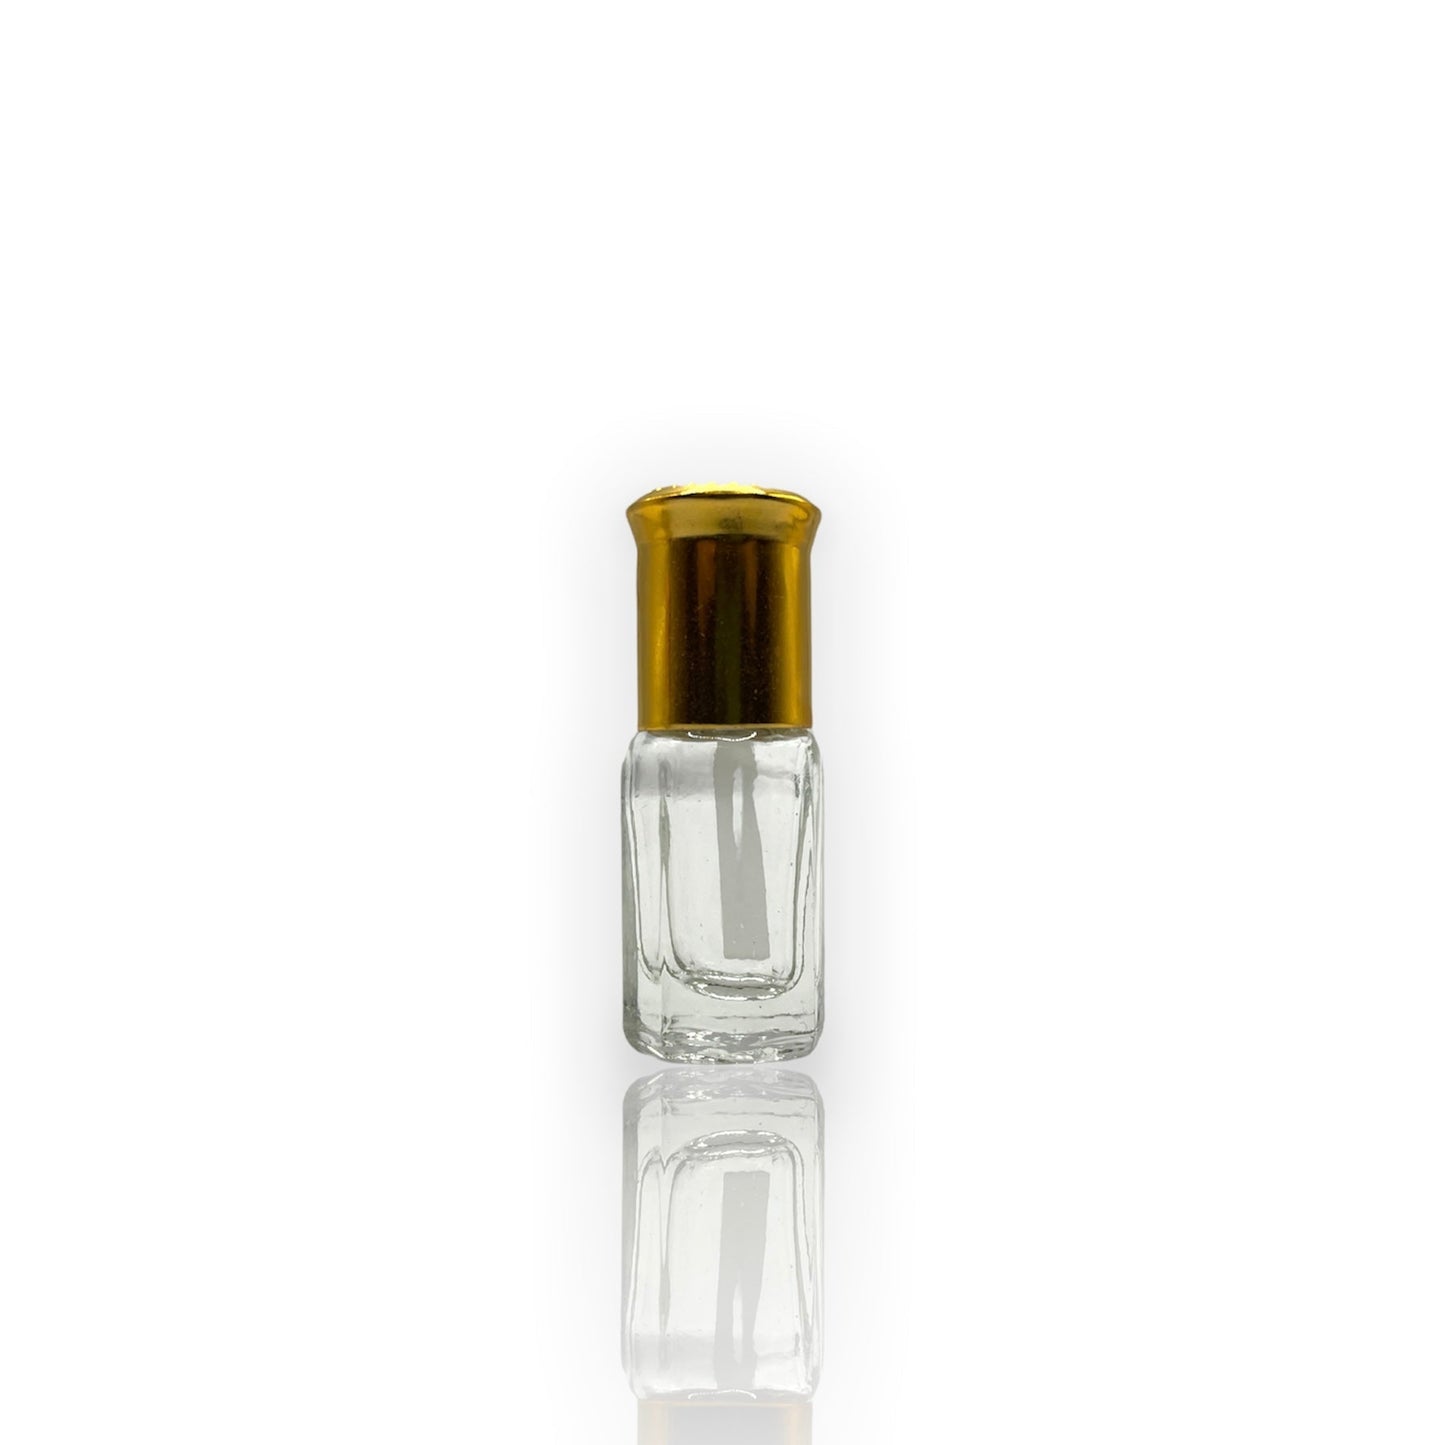 M-04 Oil Perfume *Inspired By H. Voyage